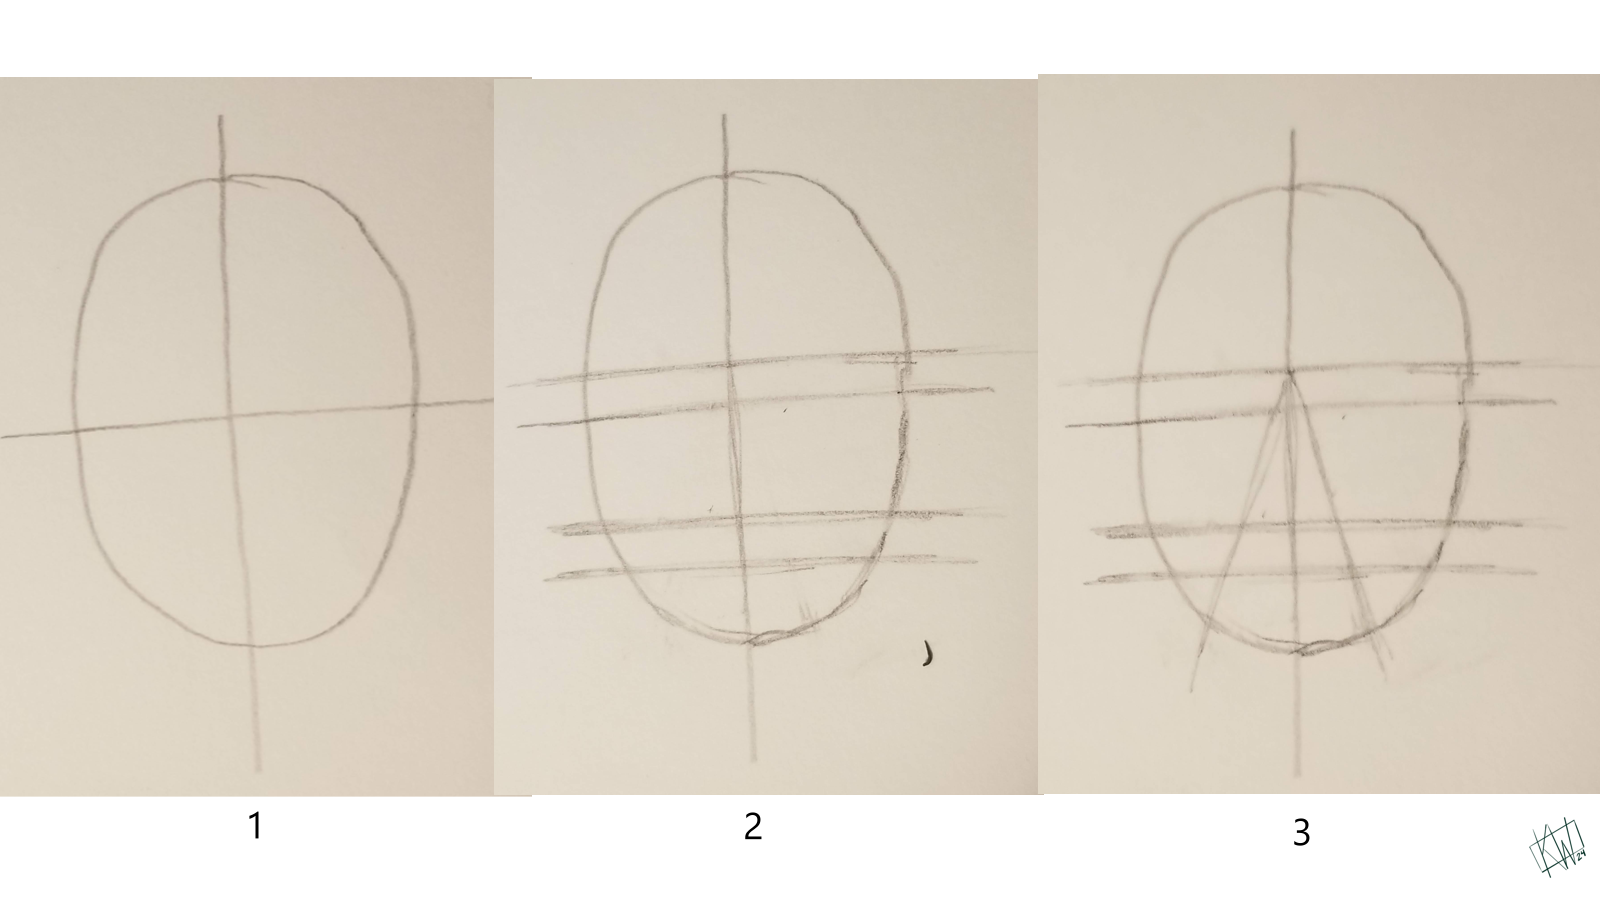 Pencil drawing of the first three steps to drawing a human face.
Step 1: Split an oval into 4 equal quarters with 2 perpendicular lines
Step 2: Add a line slightly above the middle horizontal line (this is the eye line.) Add a line half way between the middle and the bottom of the face (nose line.) Add a line slightly below that one (mouth line.)
Step 3: Draw a narrow triangle extending from the top set of double lines down through the chin.